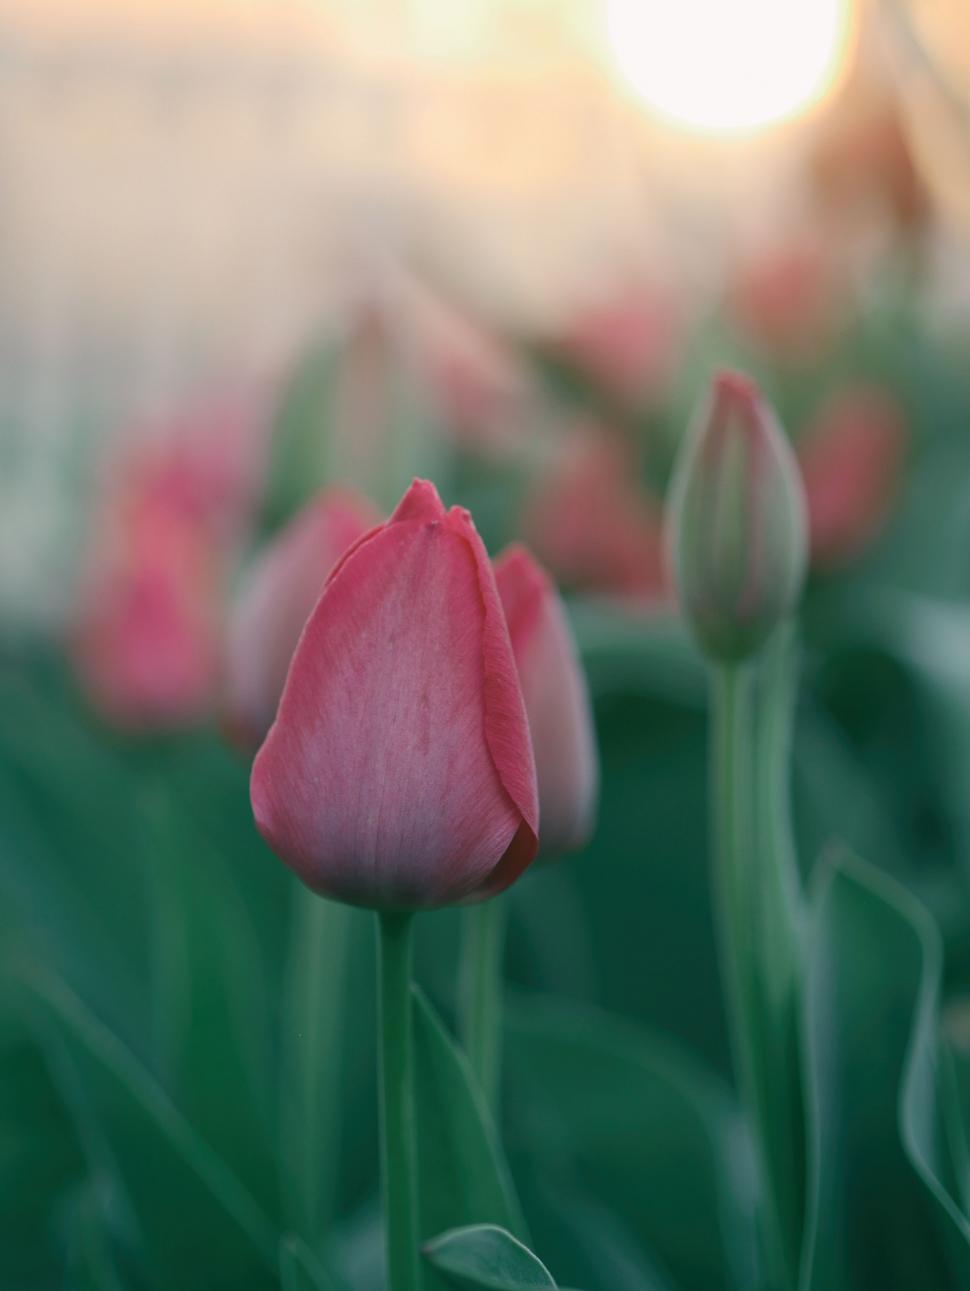 Free Image of Pink Flower Close Up With Blurry Background 